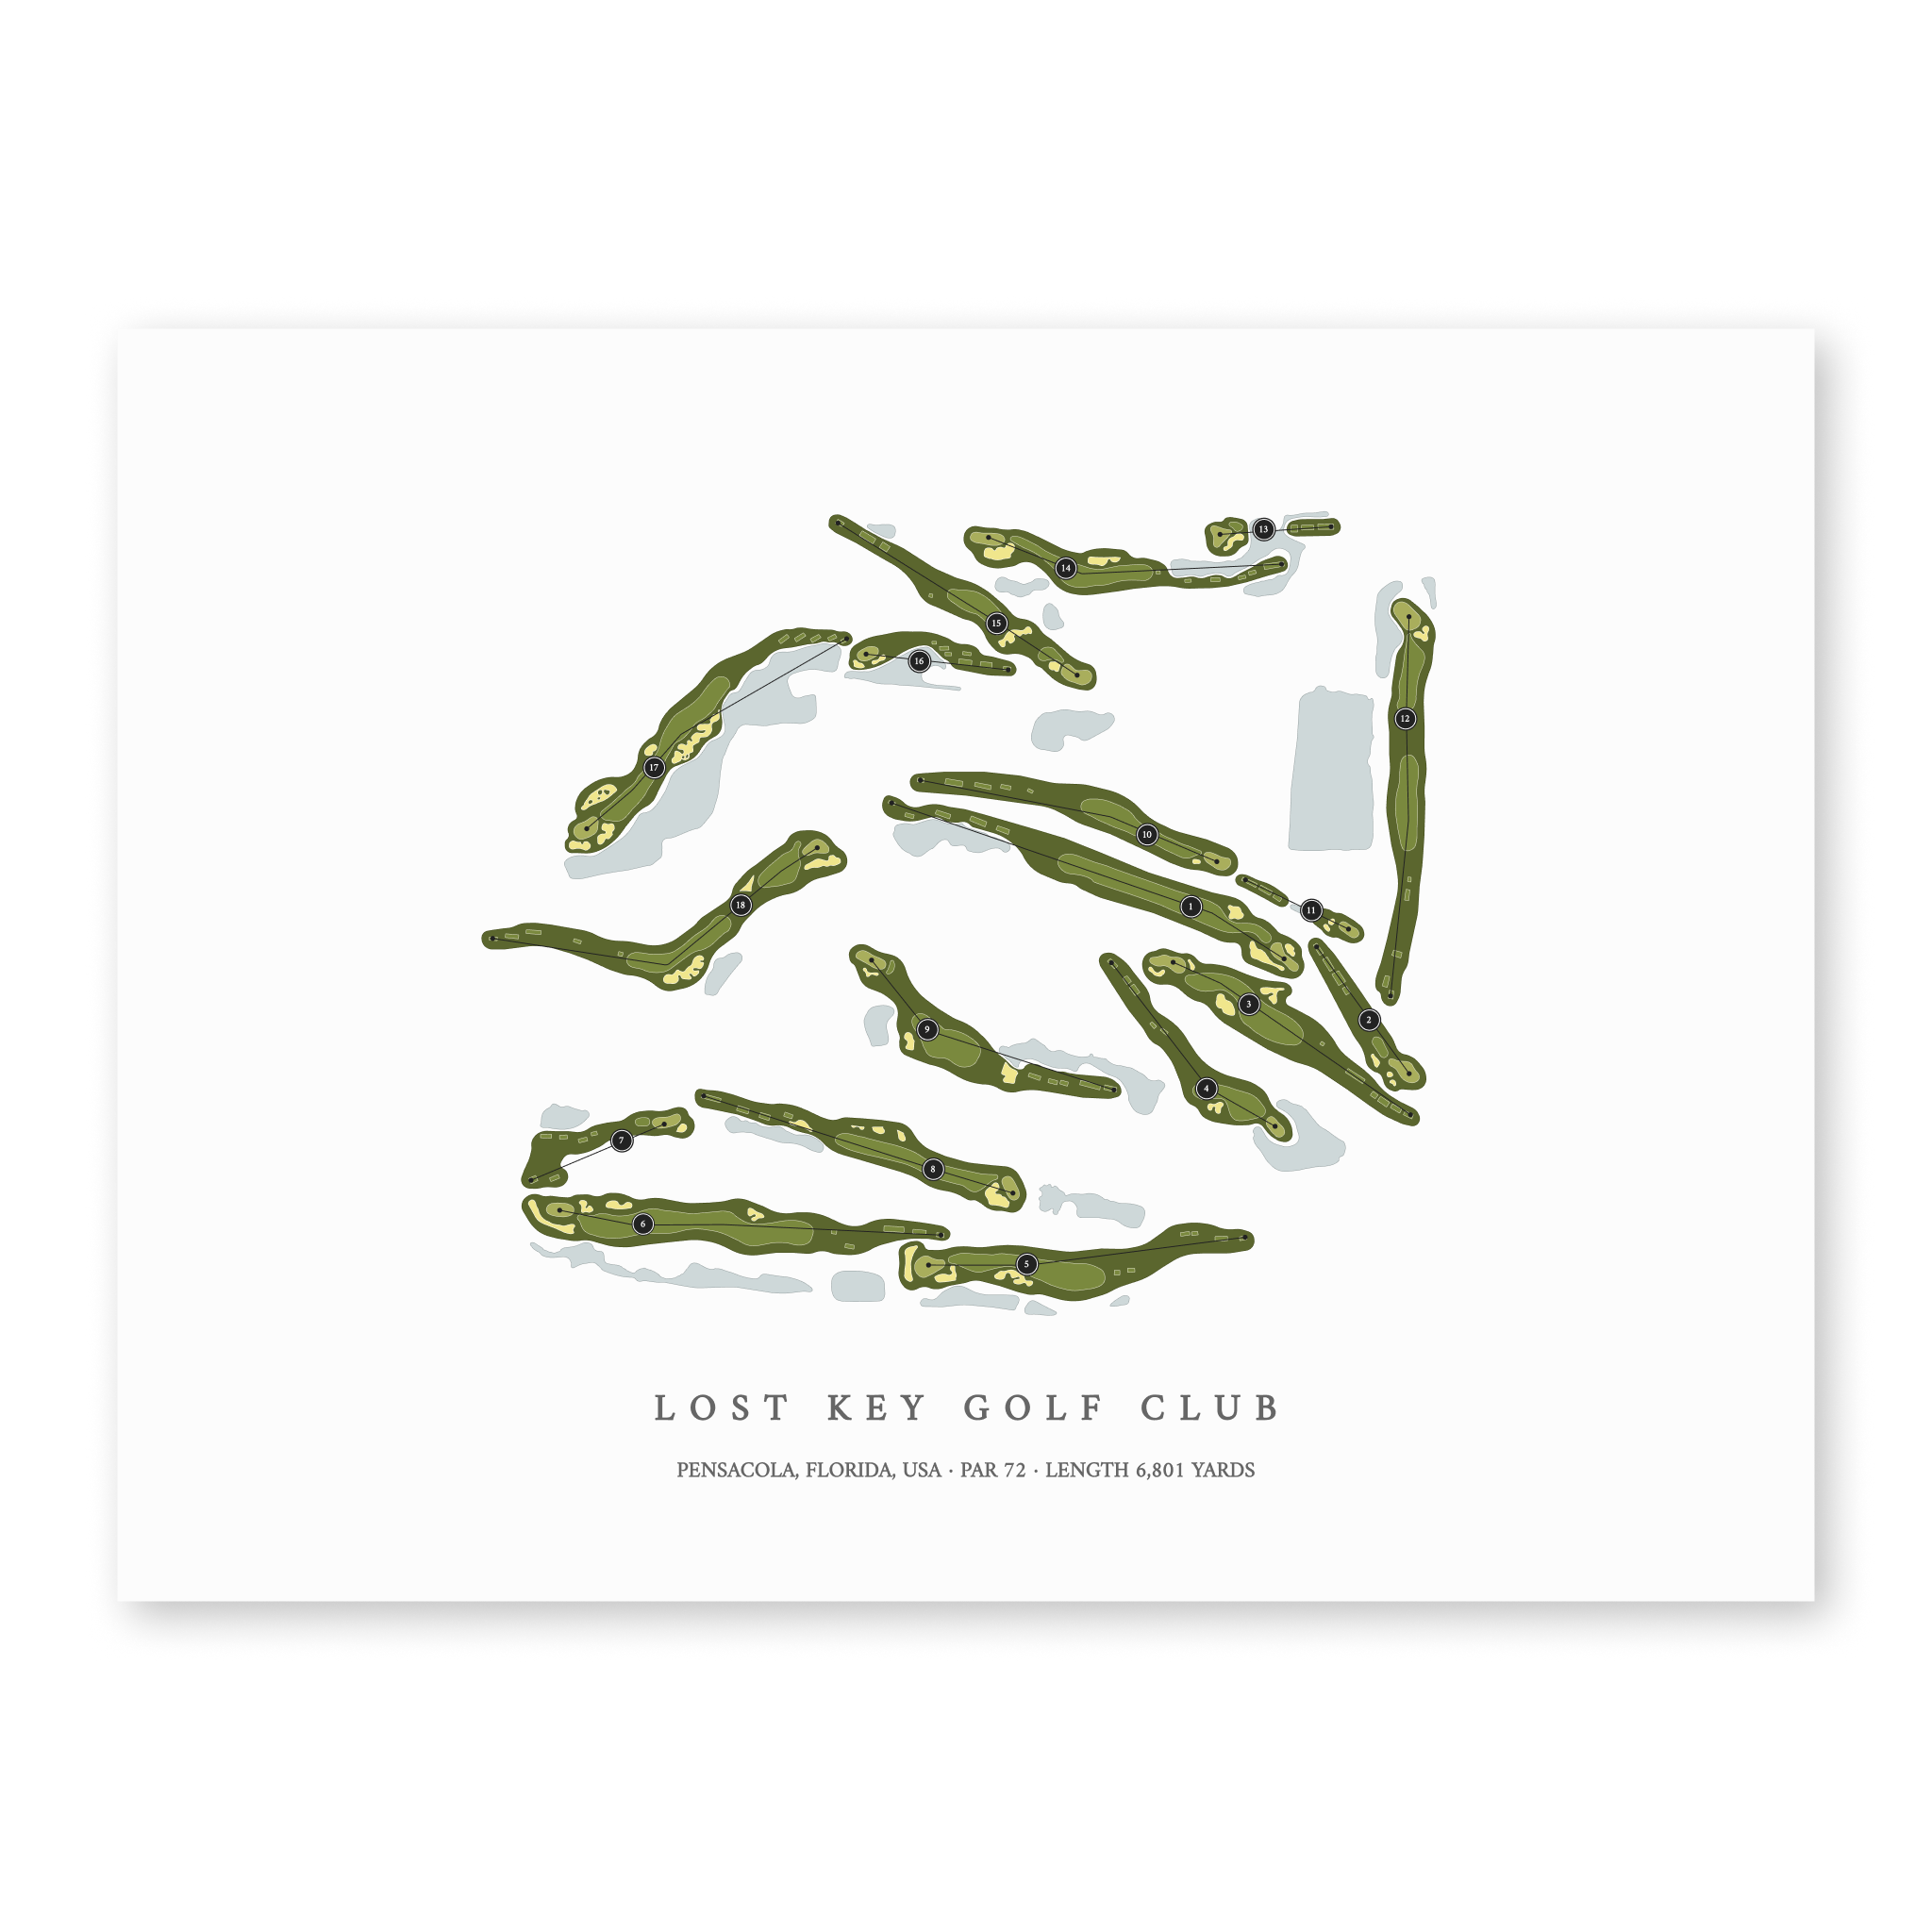 Lost Key Golf Club | Golf Course Map | Unframed With Hole Numbers #hole numbers_yes